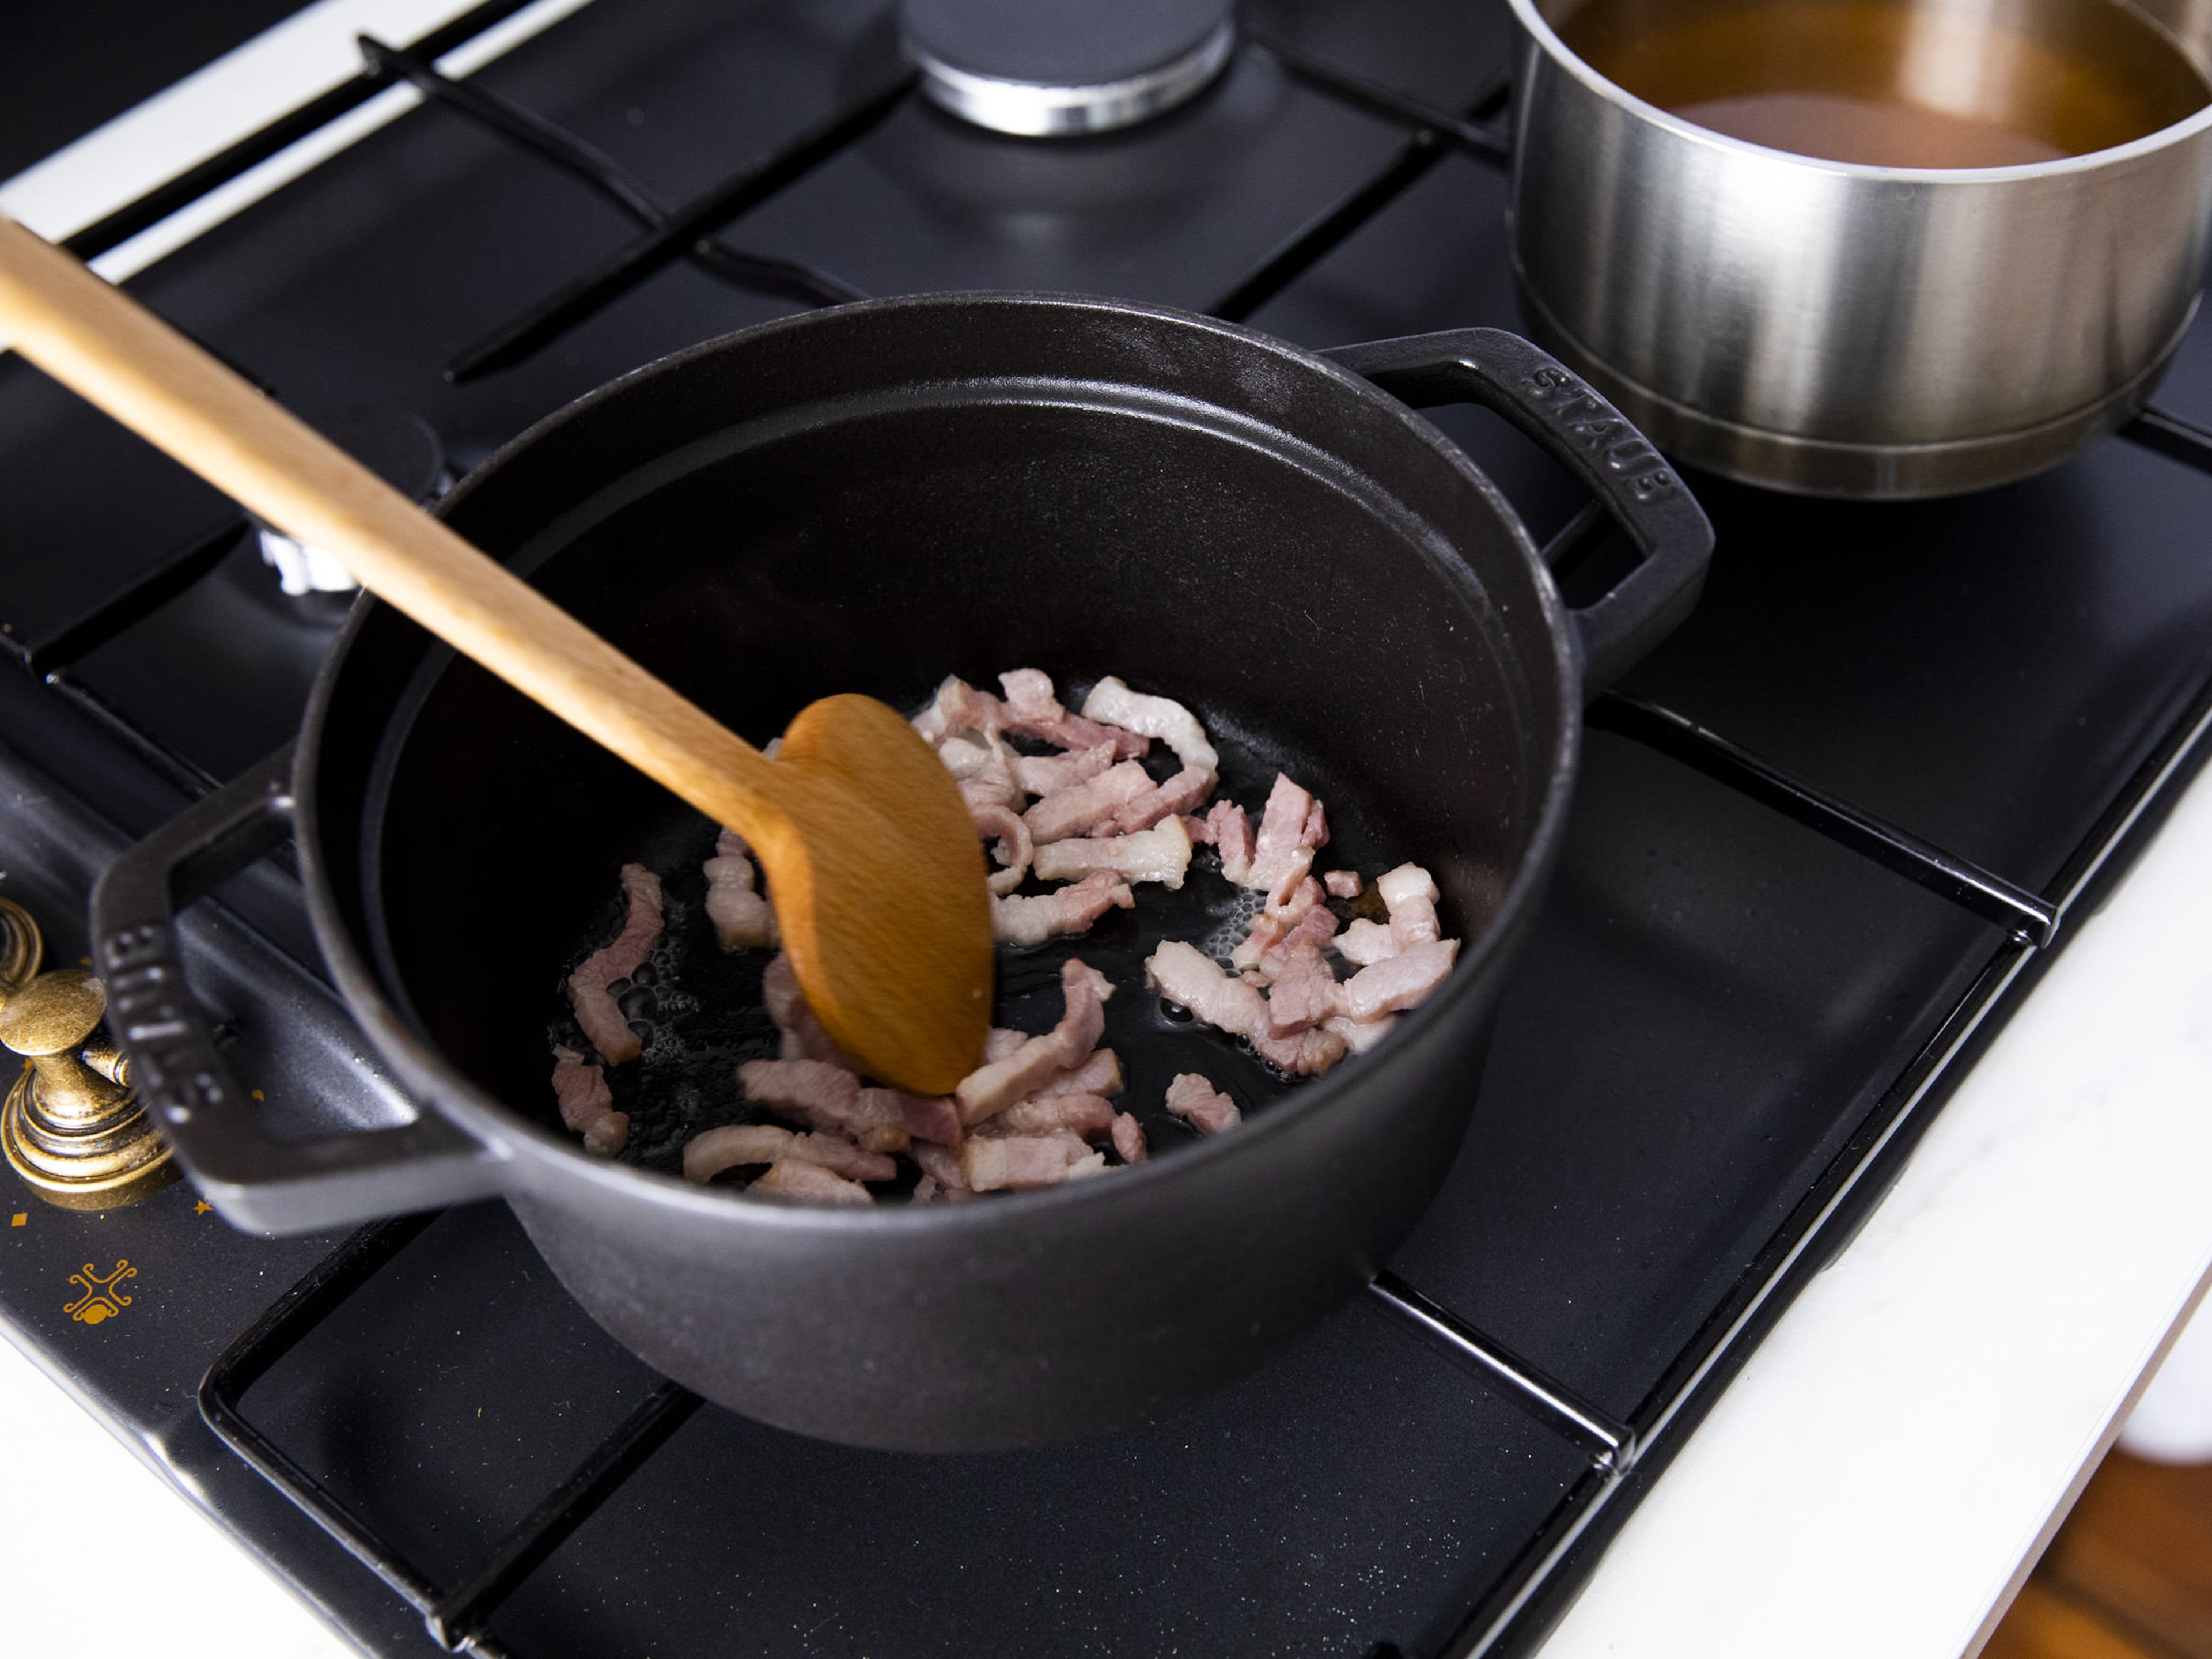 In a separate pot over medium-high heat, fry bacon until crispy. Remove from the pot, leaving the fat in the pan. Add the risotto rice and sauté for approx. 2 min.